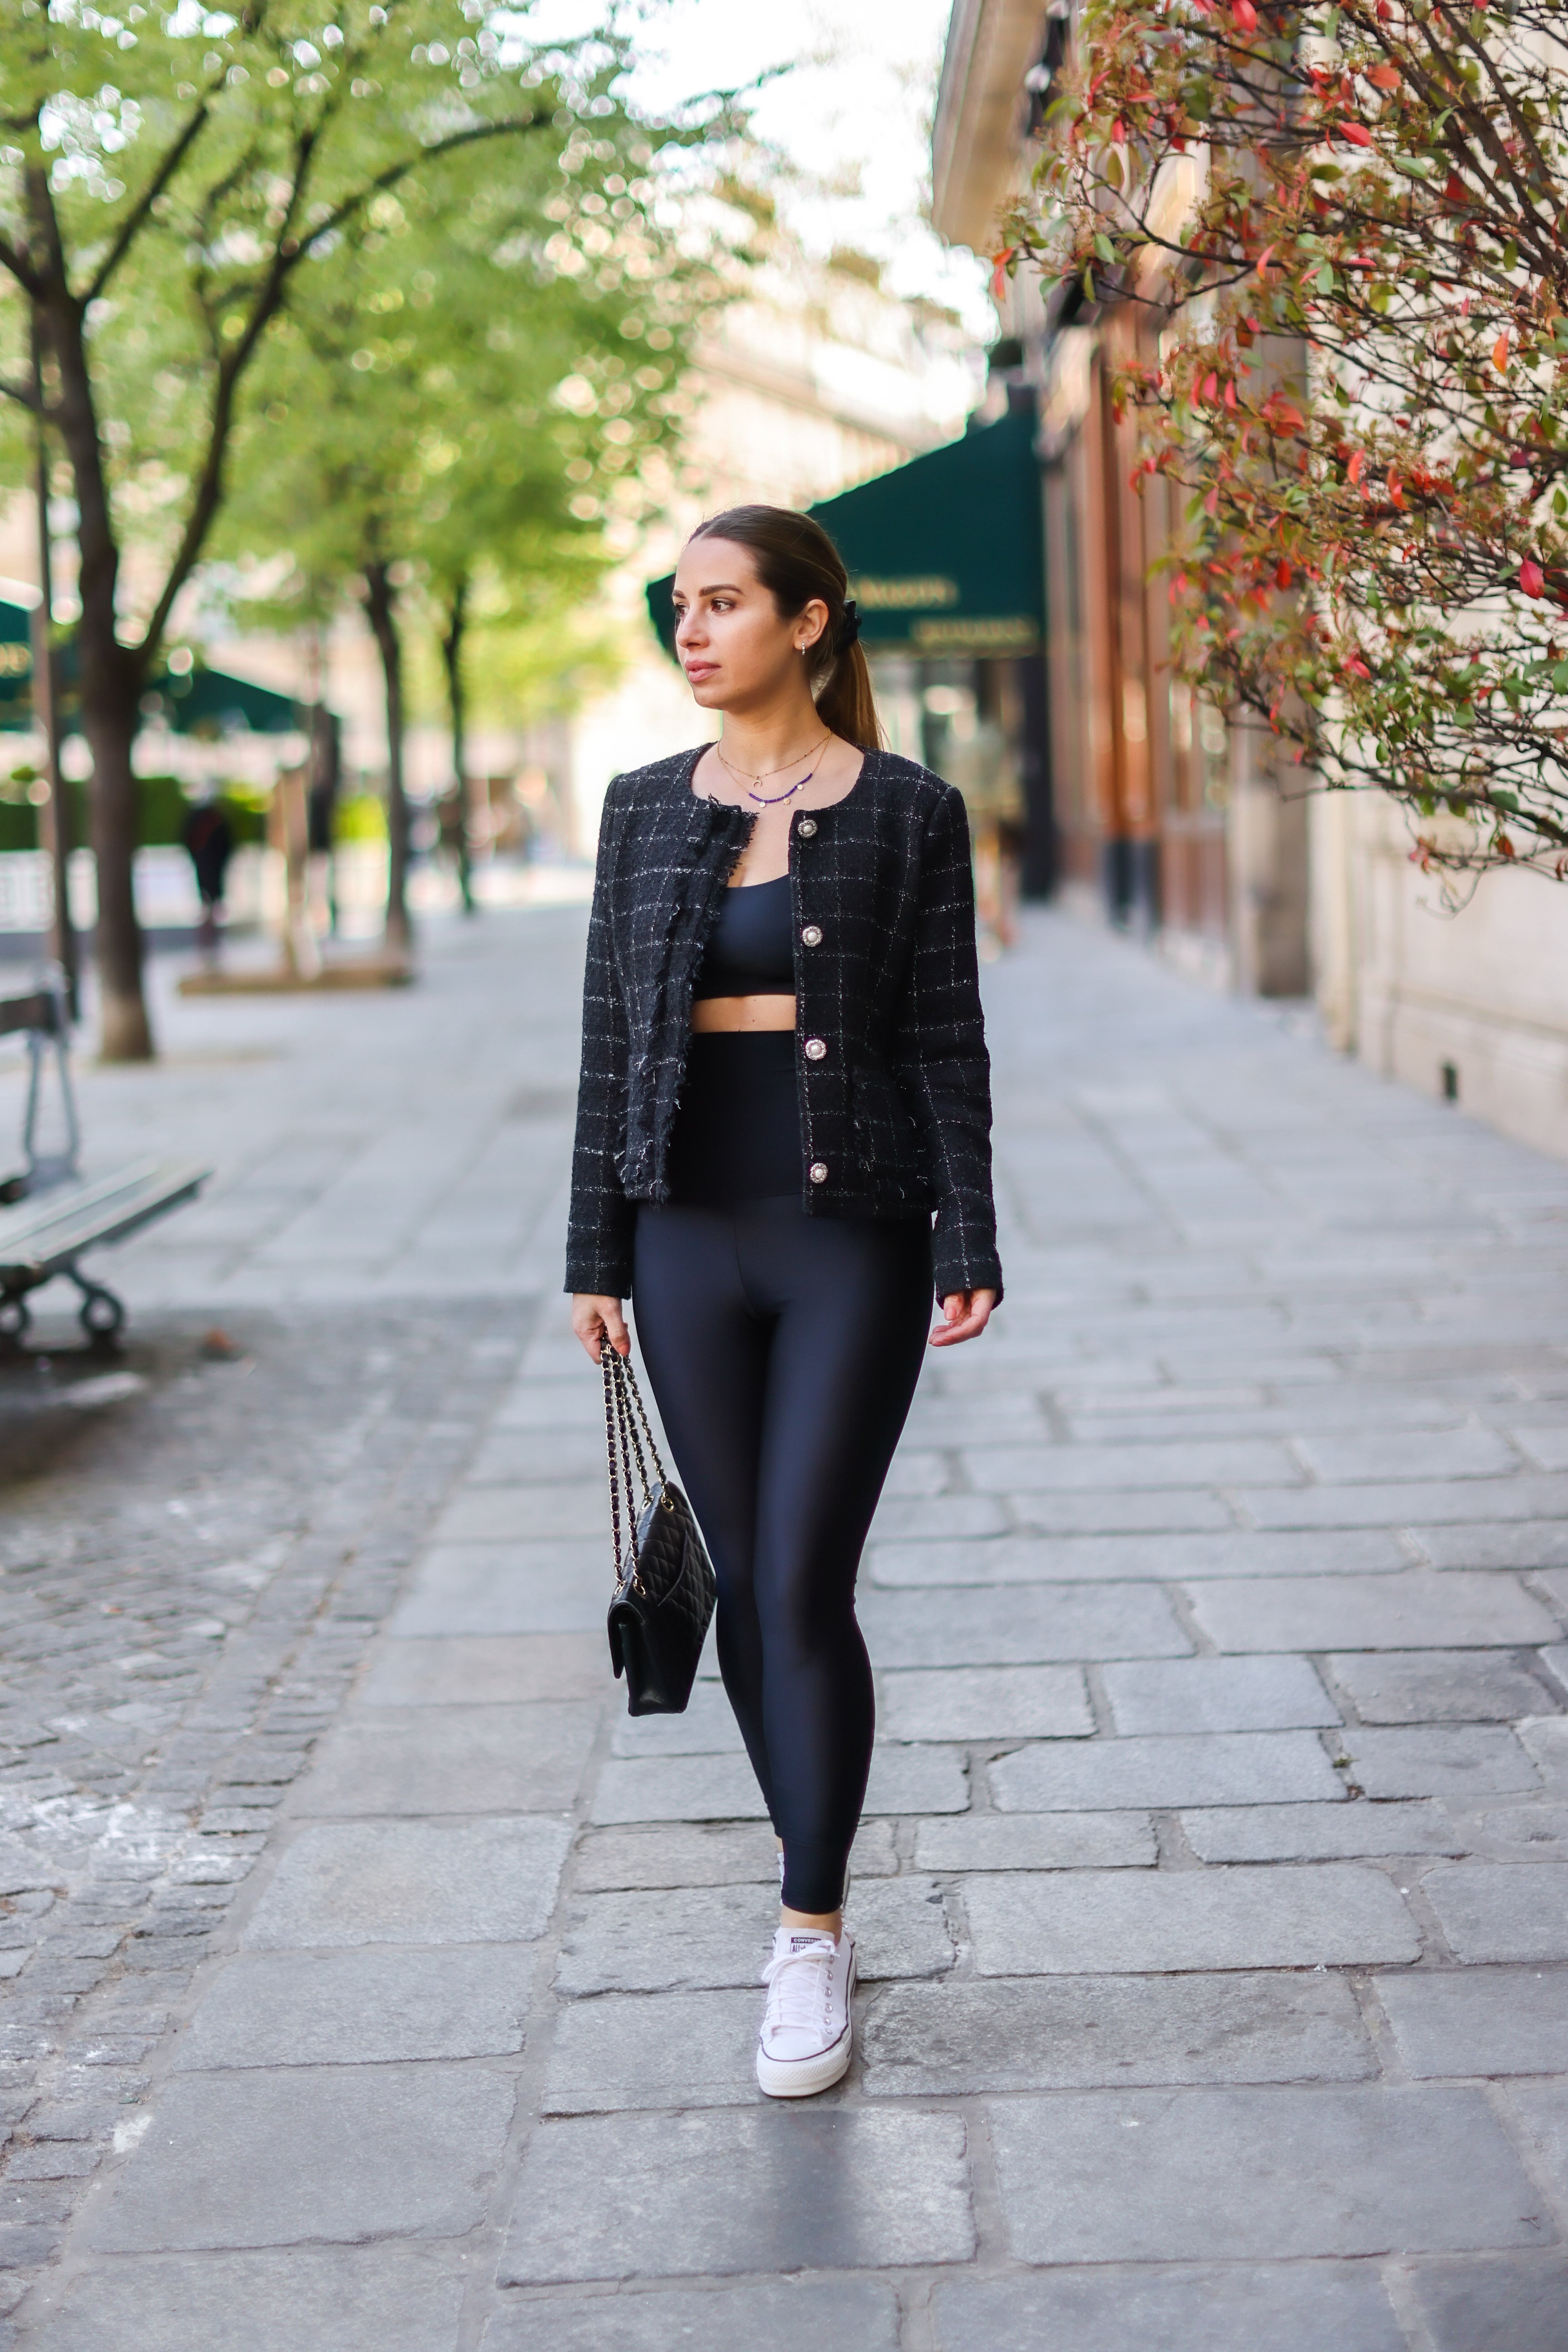 37 Fancy Work Outfits Ideas With Black Leggings To Copy Right Now  Black leggings  outfit, Outfits with leggings, Black leggings outfit spring